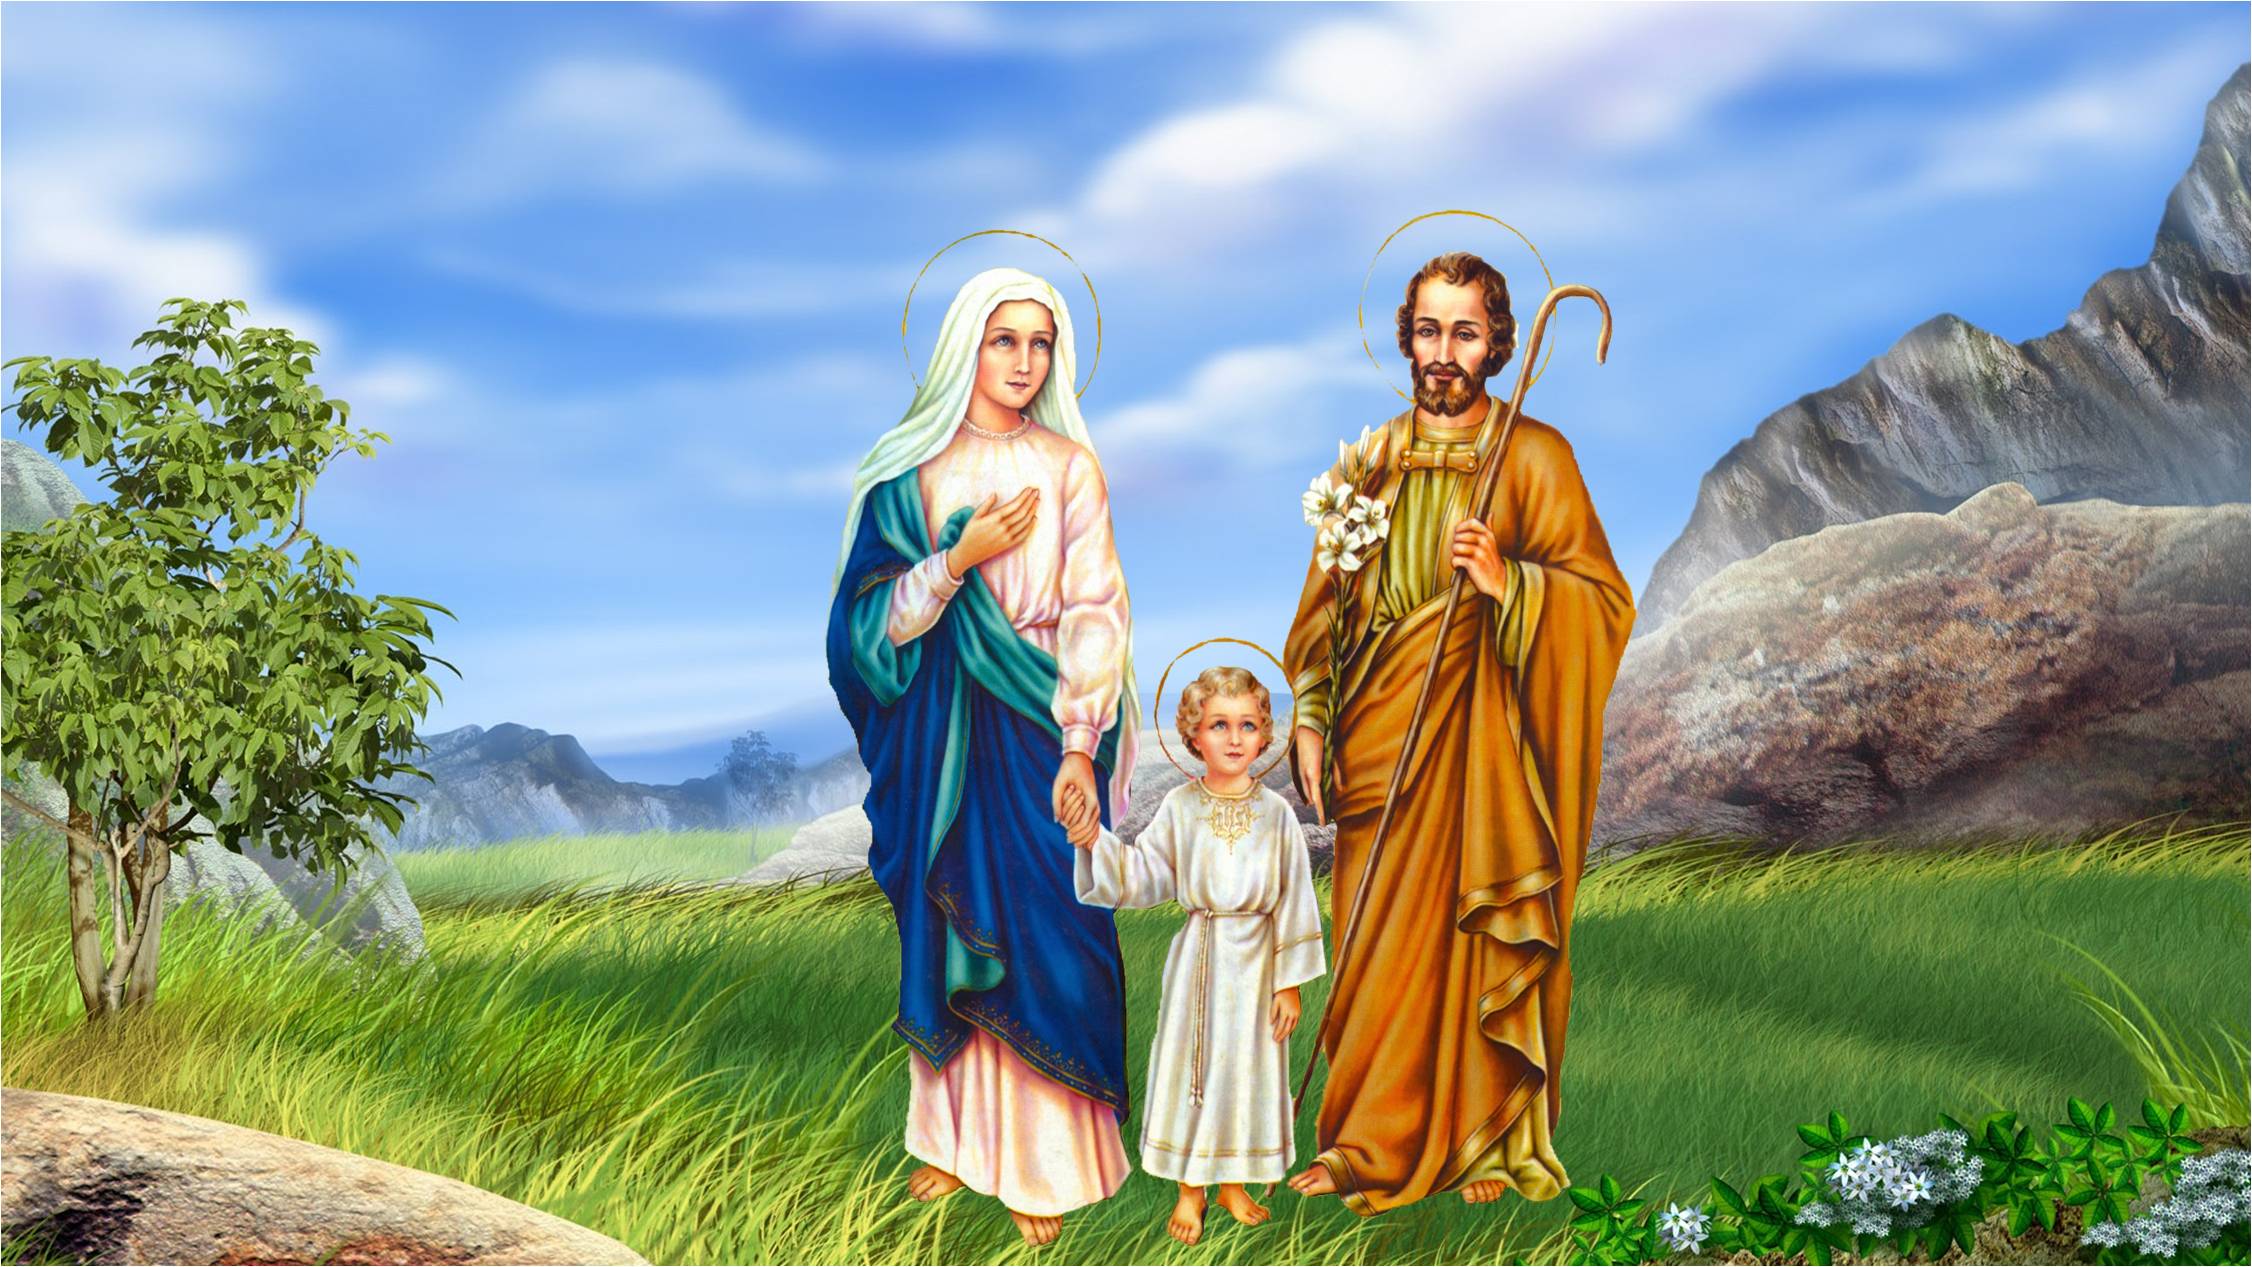 Catholic Pictures Of The Holy Family - Hd Wallpaper Holy Family - 2252x1267  Wallpaper 